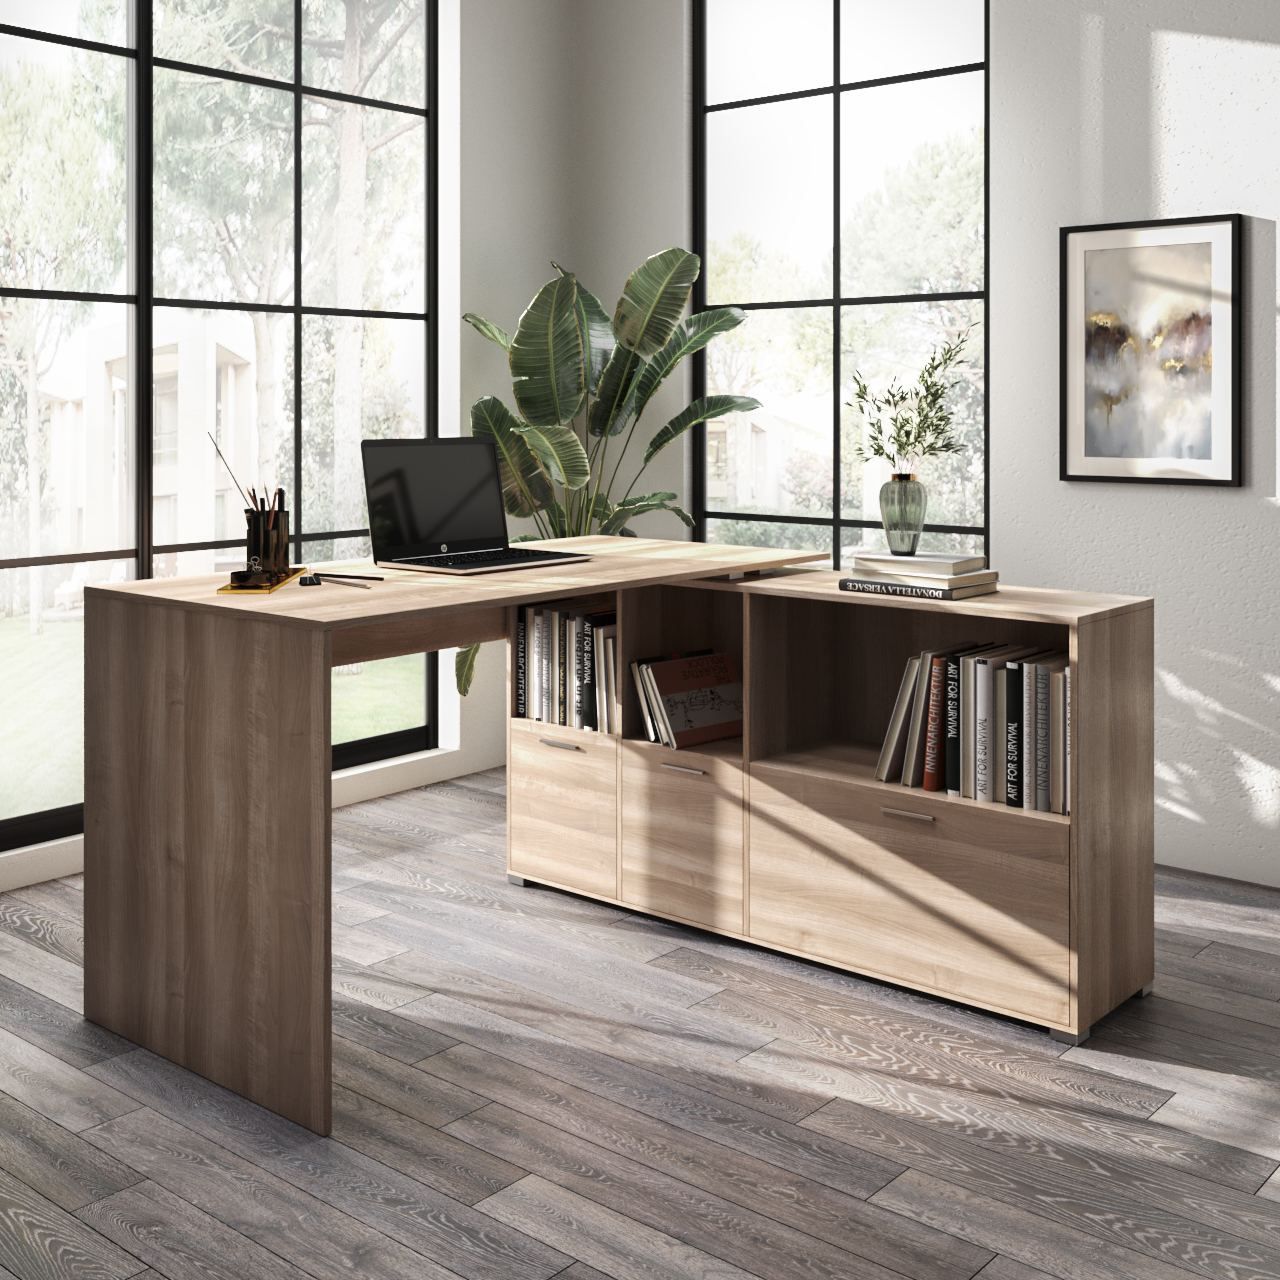 ⭐️ REVERSIBLE EXECUTIVE L-SHAPE CORNER DESK WITH DRAWERS AND SHELVES⭐️